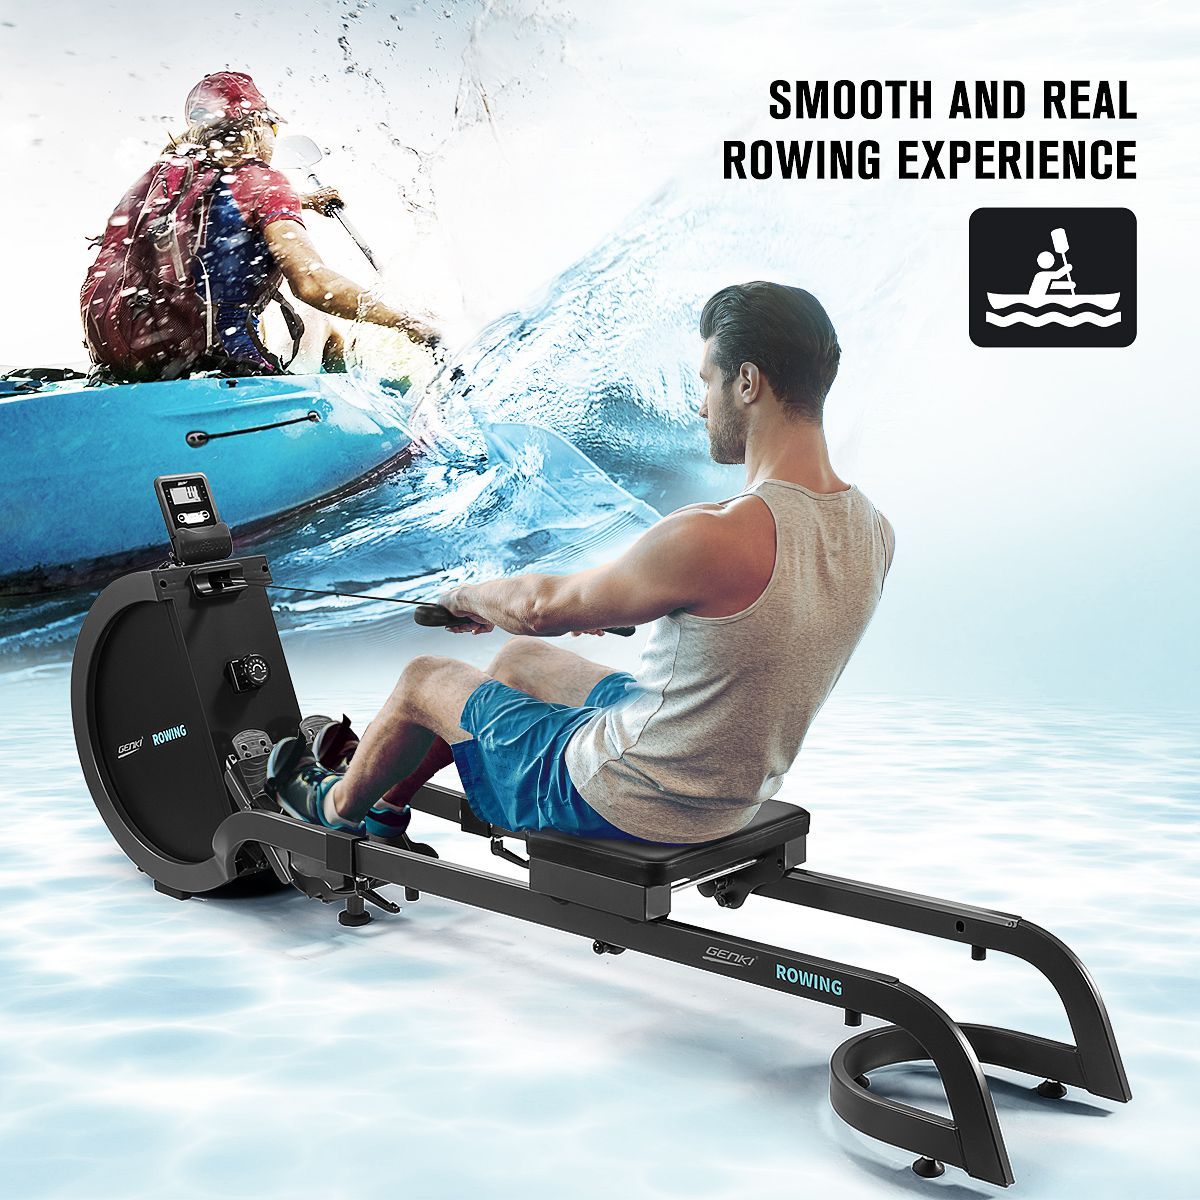 YOLEO Magnetic Rowing Machine Indoor Rower for Home use with 16 Level Adjustable Resistances Smart Display for Home Gym & Full Body Workout 